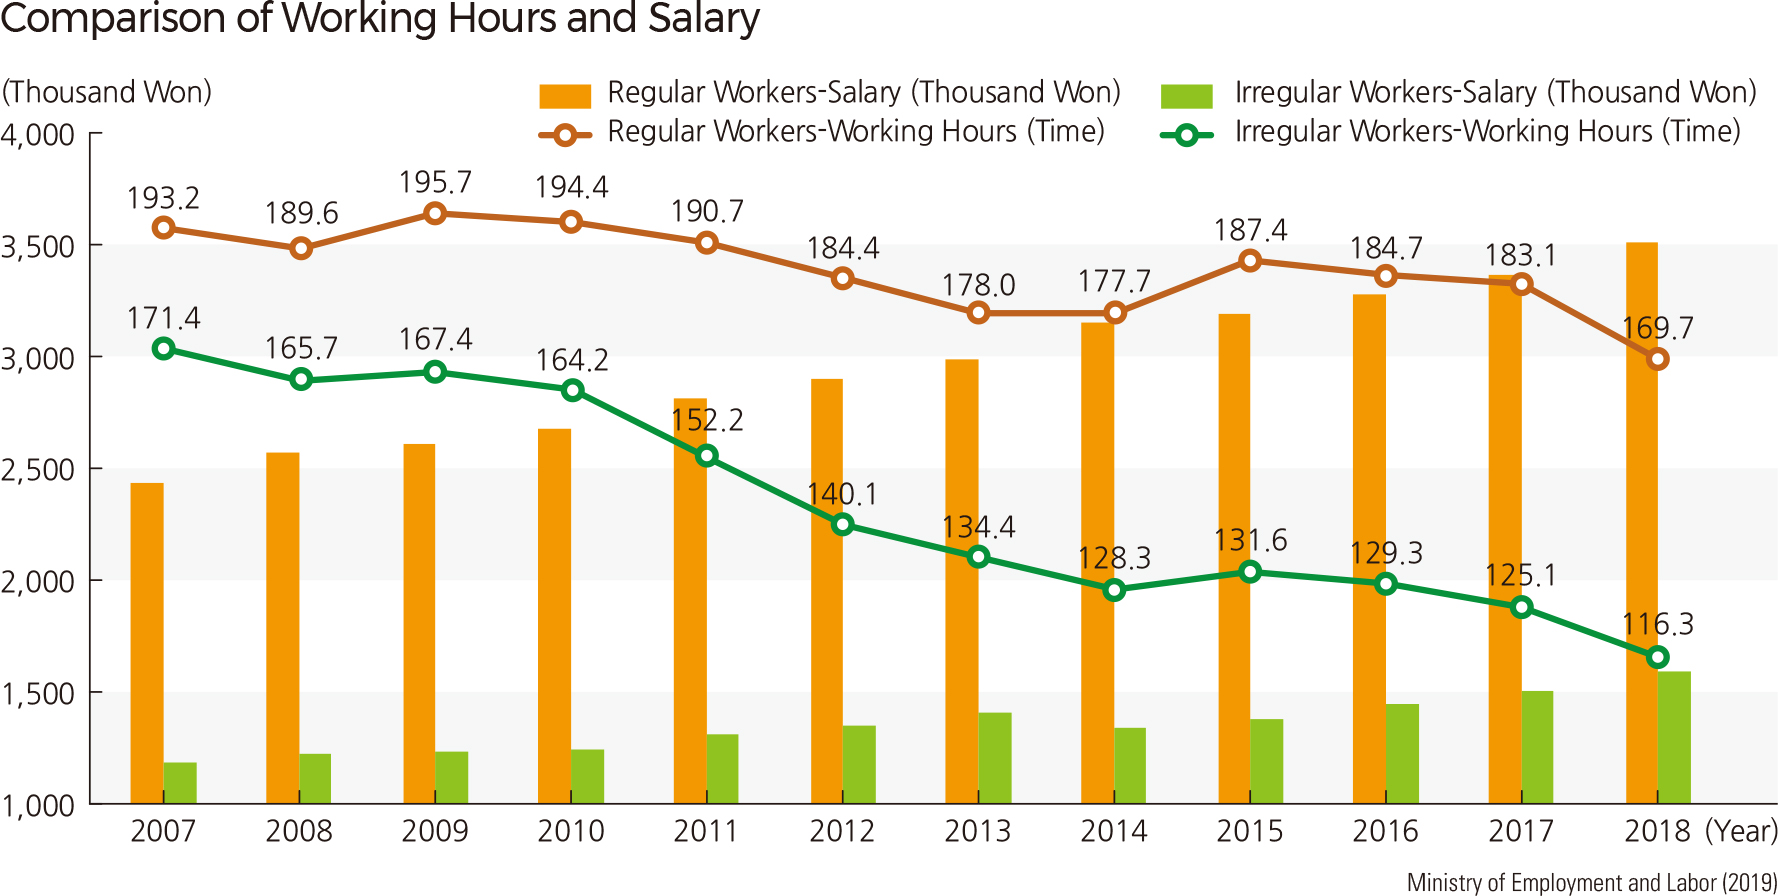 Comparison of Working Hours and Salary